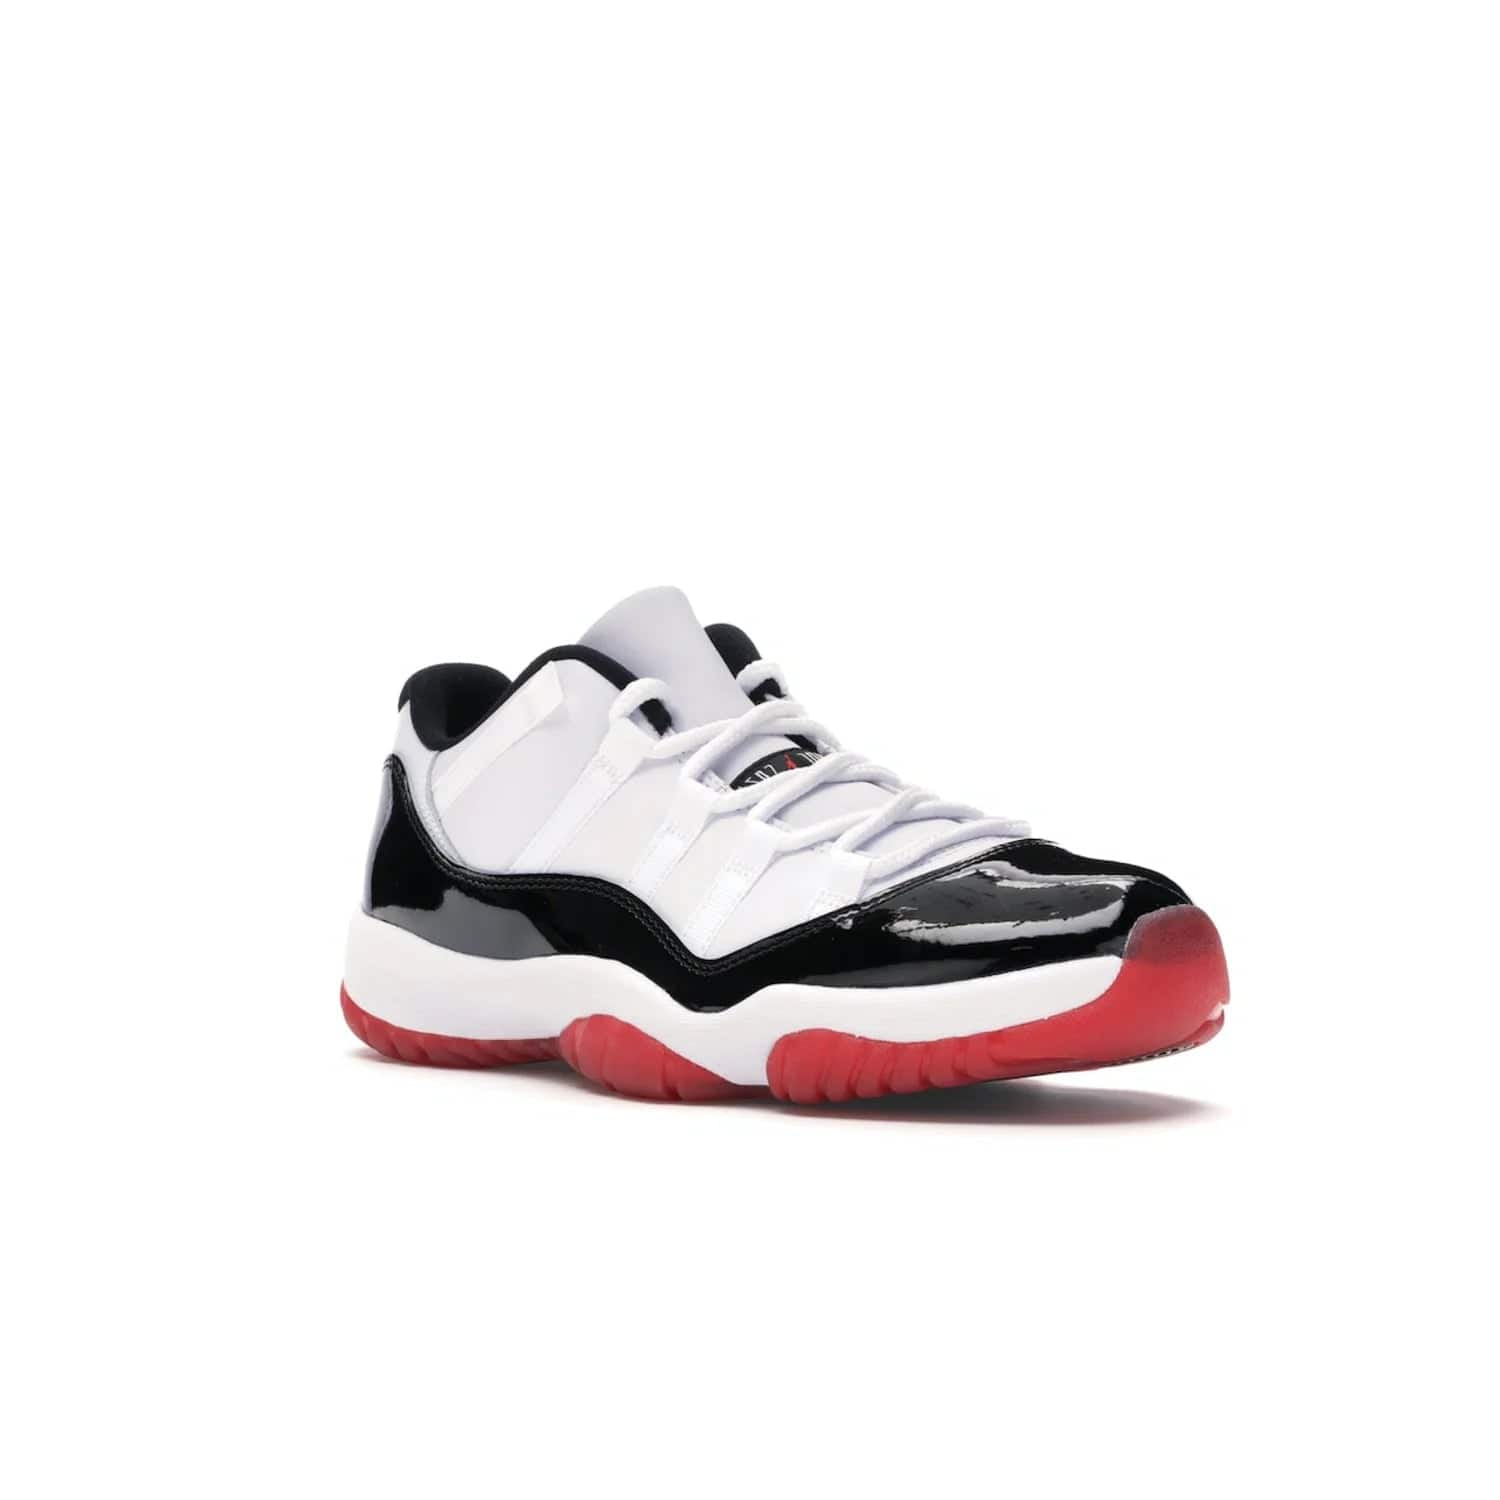 Jordan 11 Retro Low Concord Bred - Image 5 - Only at www.BallersClubKickz.com - Grab the classic Jordan 11 look with the Jordan 11 Retro Low Concord Bred. With white and black elements and the iconic red outsole of the Jordan 11 Bred, you won't miss a beat. Released in June 2020, the perfect complement to any outfit.